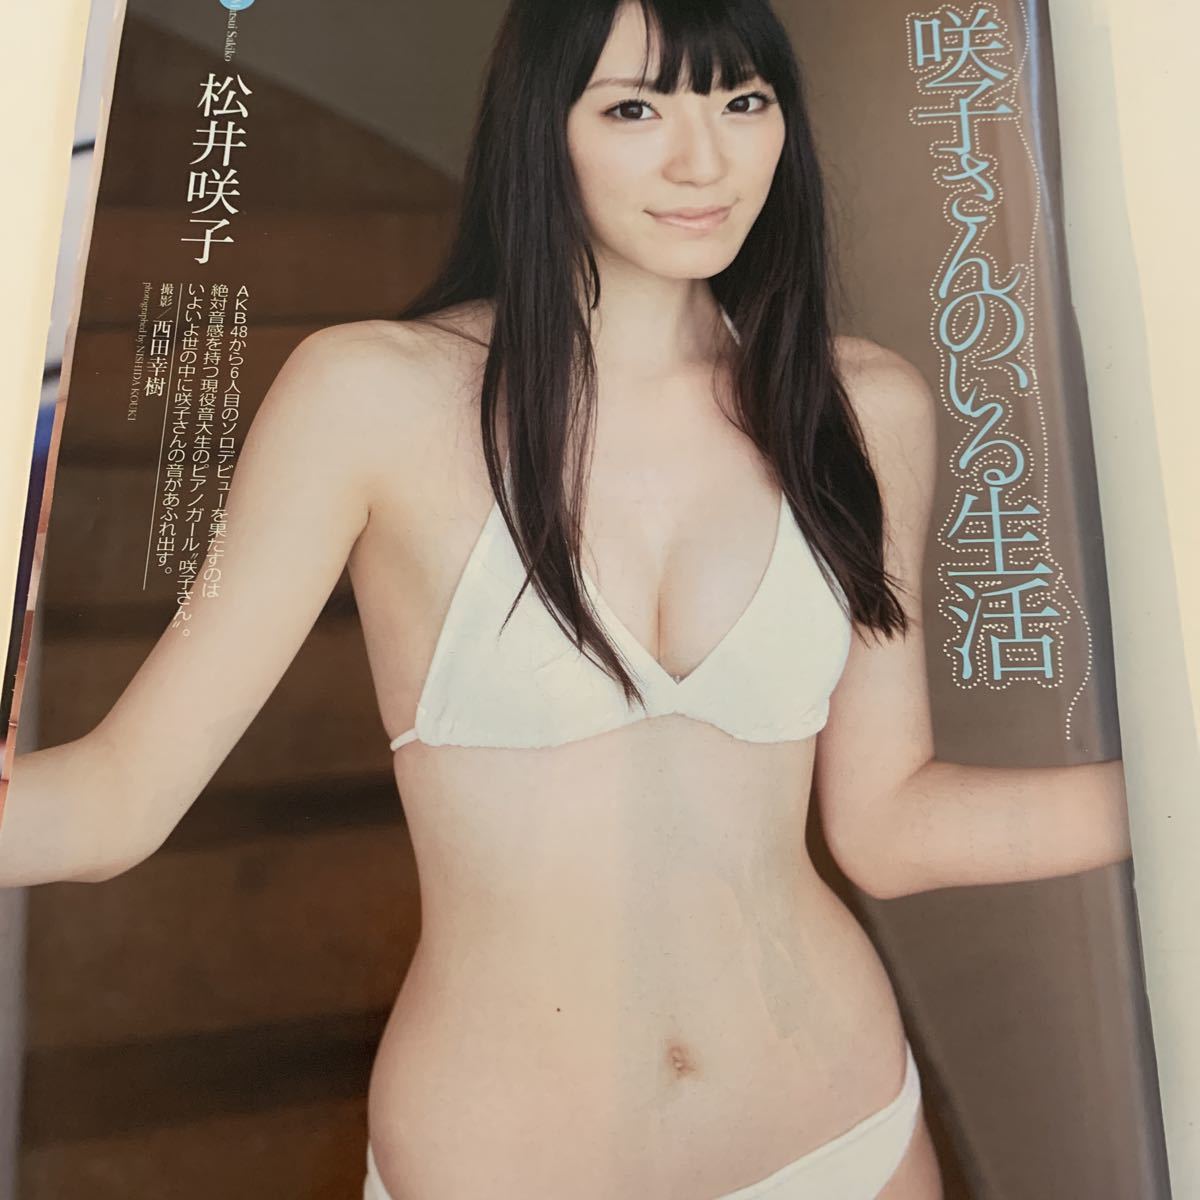 12 A50-1 松井咲子 切り抜き4ページ2012年☆送料140_画像1